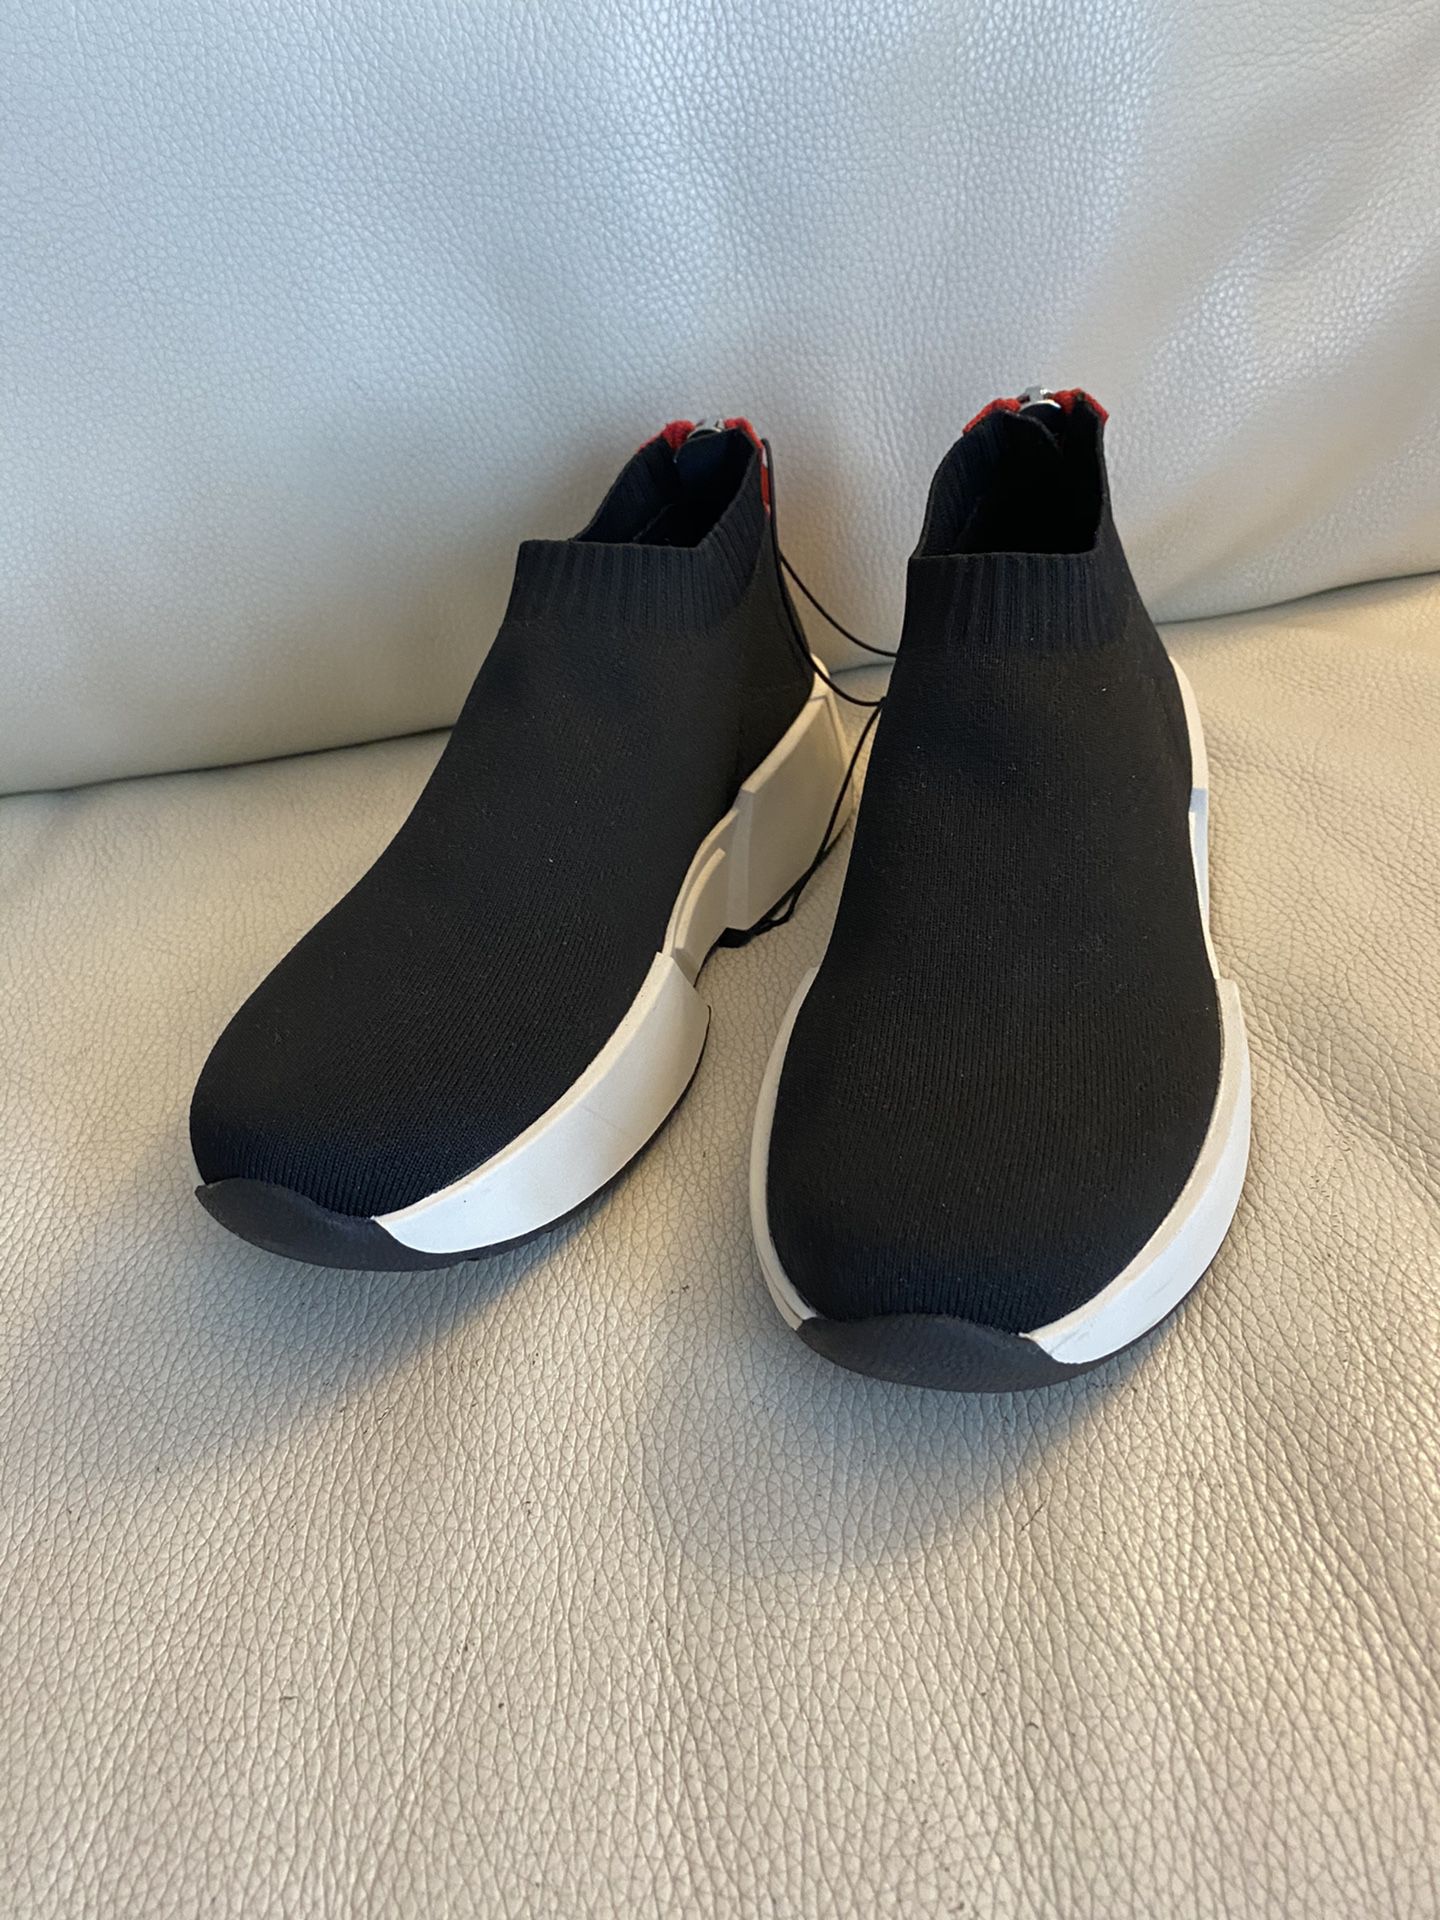 DKNY SHOES WOMAN SIZE 8